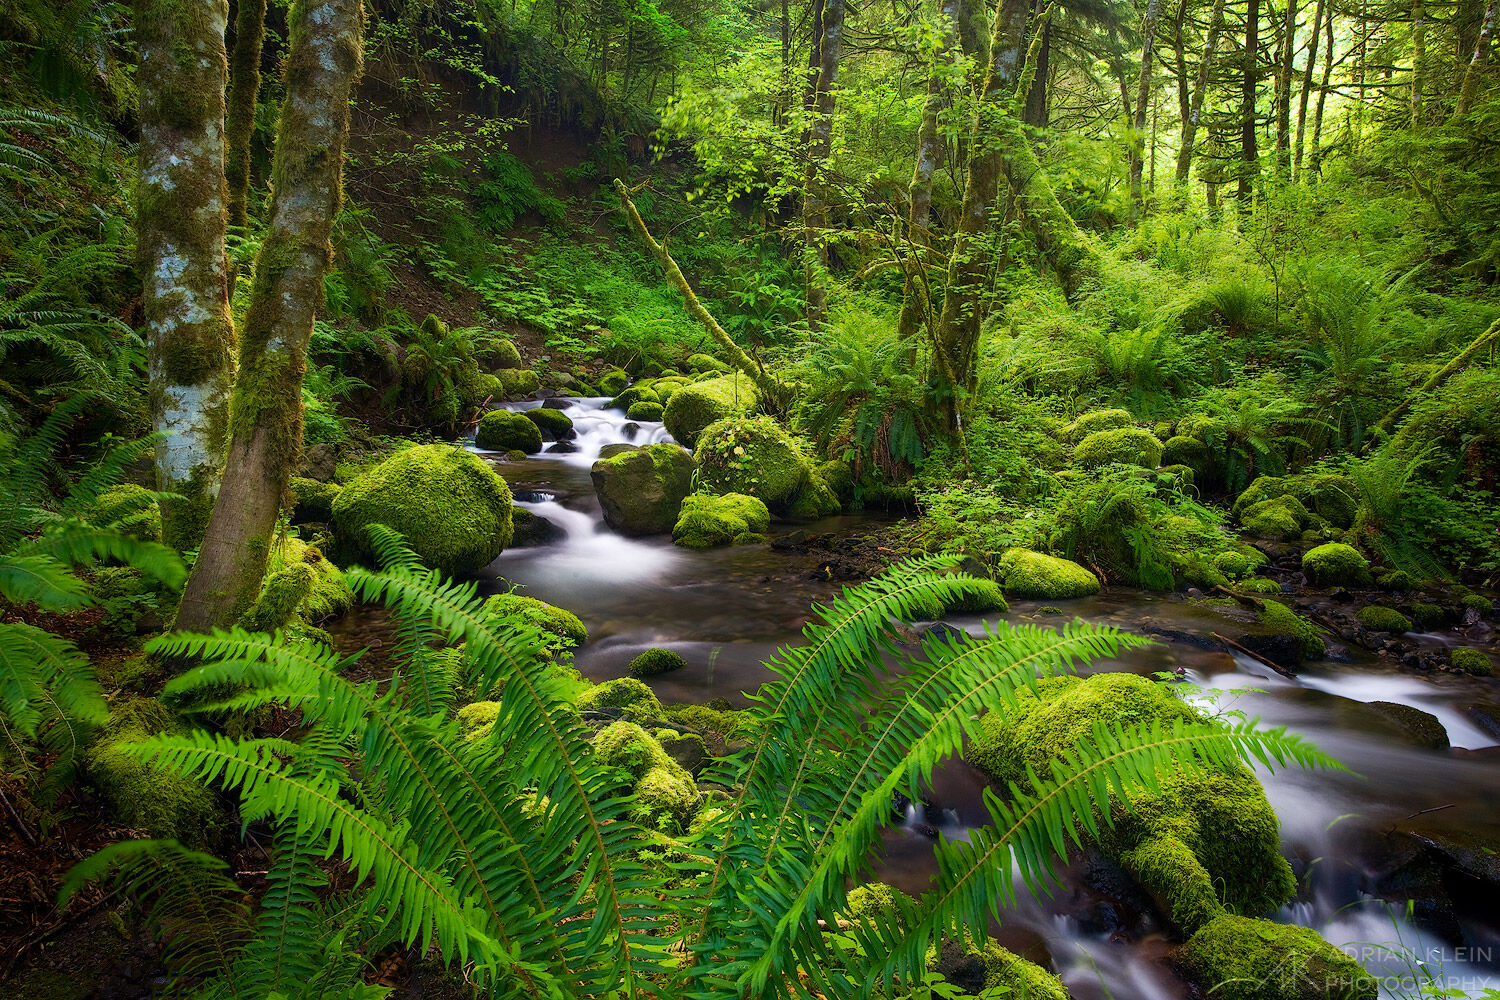 A fern leads the viewer into the lush green paradise of the Columbia River Gorge. Limited Edition of 50.